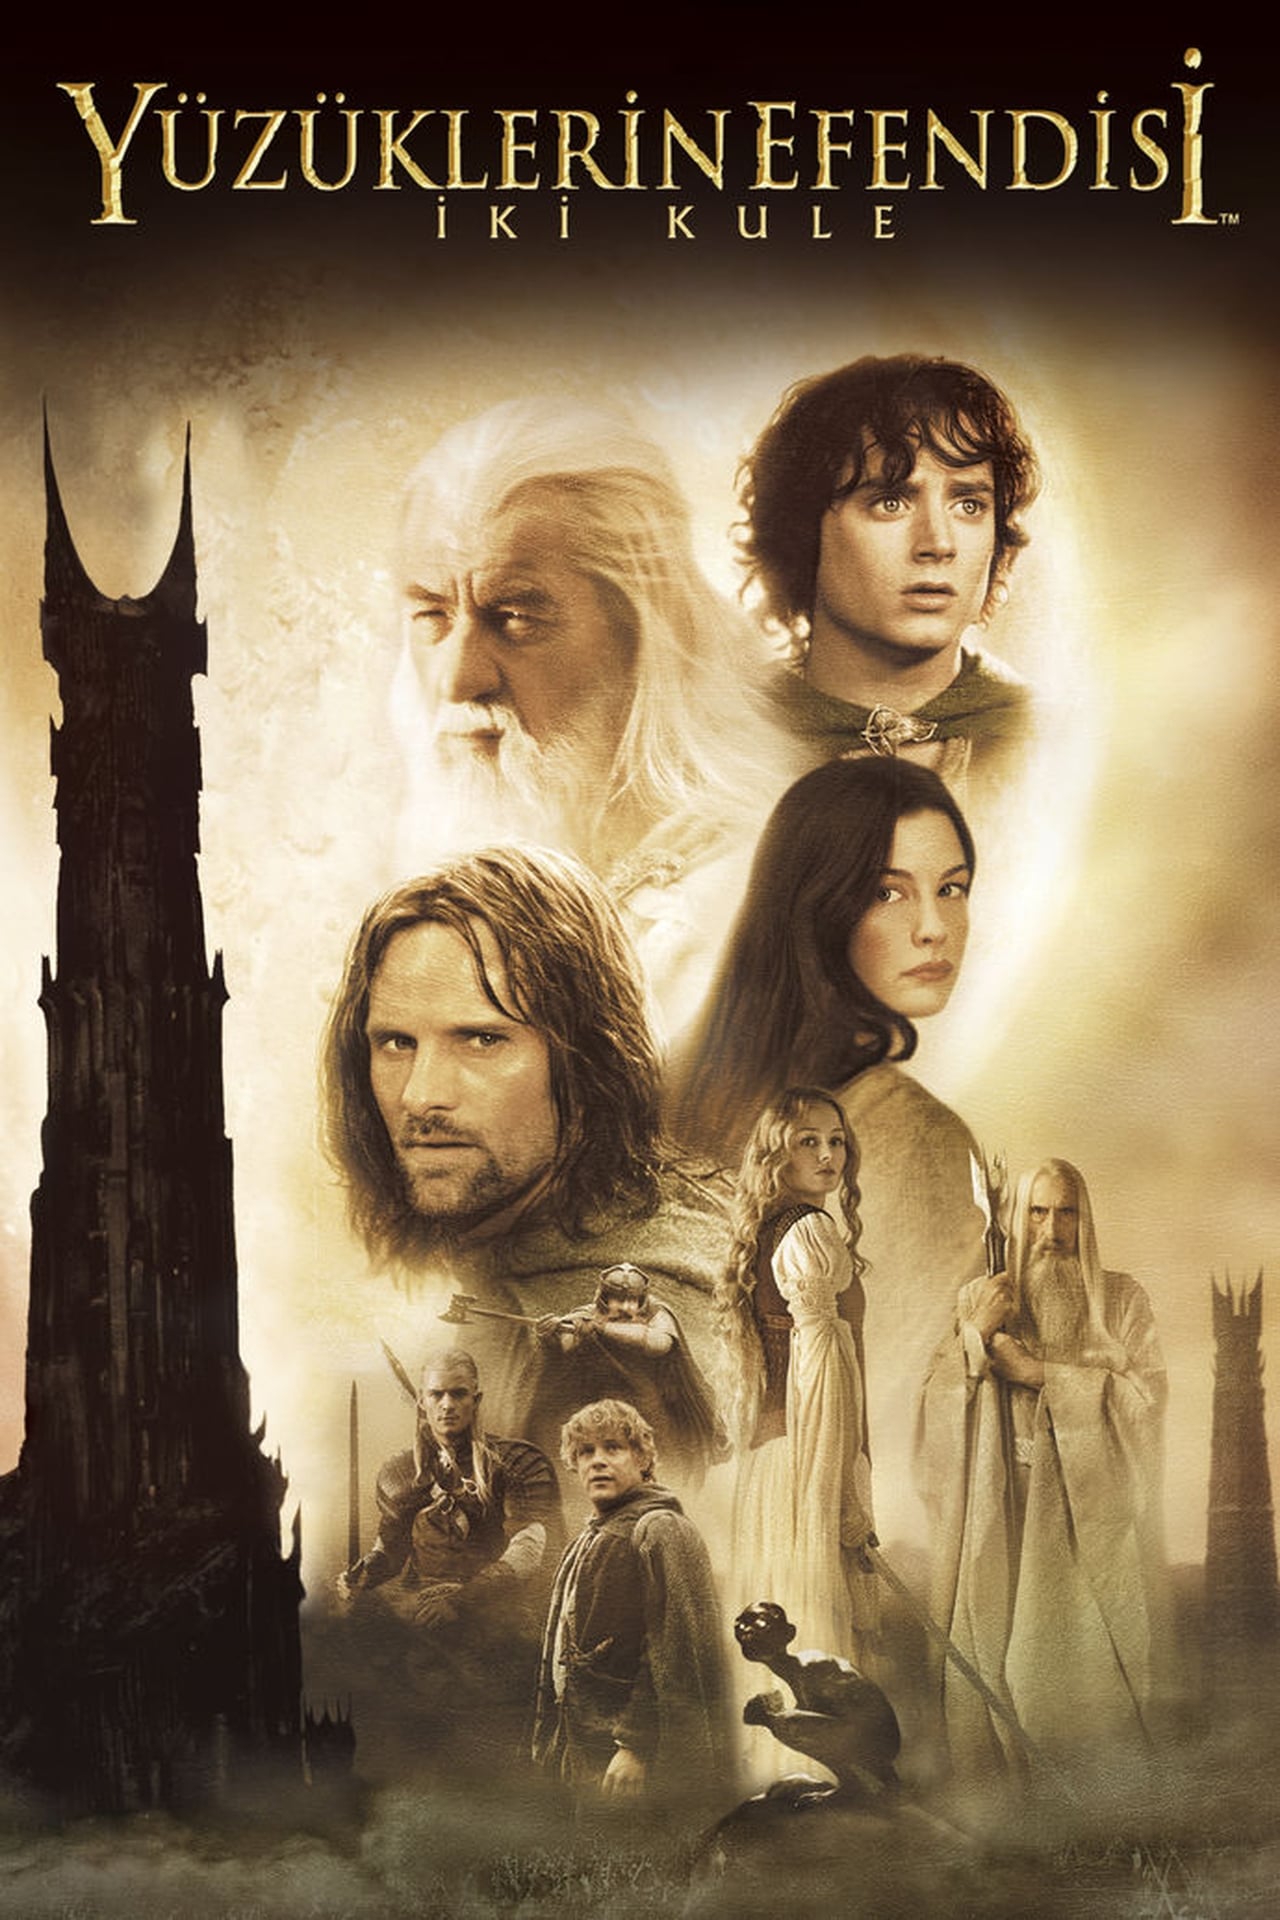 The Lord of the Rings: The Two Towers (2002) Theatrical Cut 640Kbps 23.976Fps 48Khz 5.1Ch DD+ AMZN E-AC3 Turkish Audio TAC